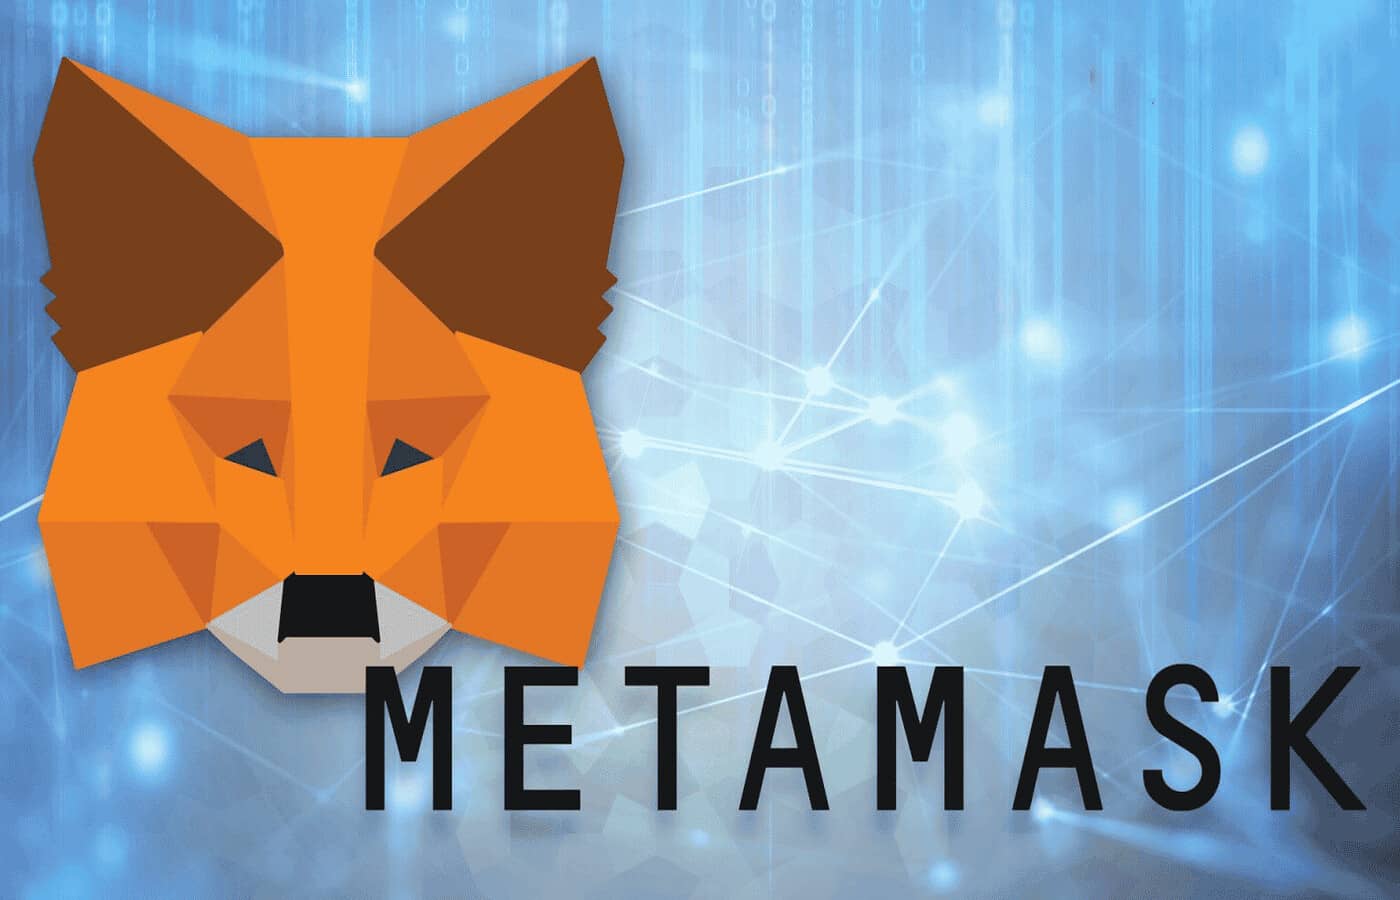 MetaMask Integrates Blockaid Security Alerts For 30M Users Across Multiple Chains